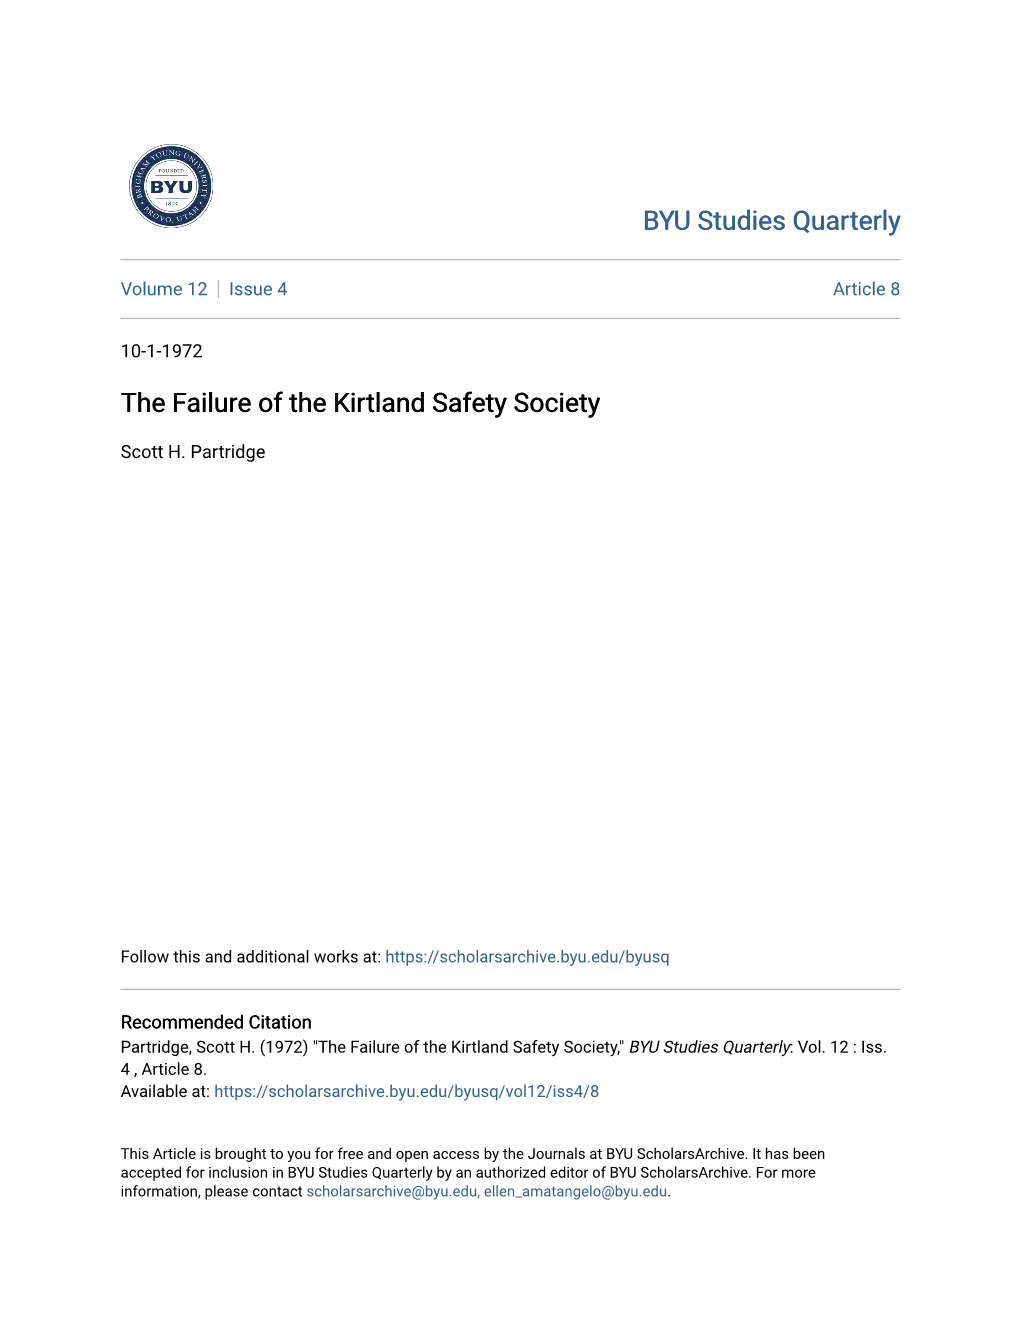 The Failure of the Kirtland Safety Society